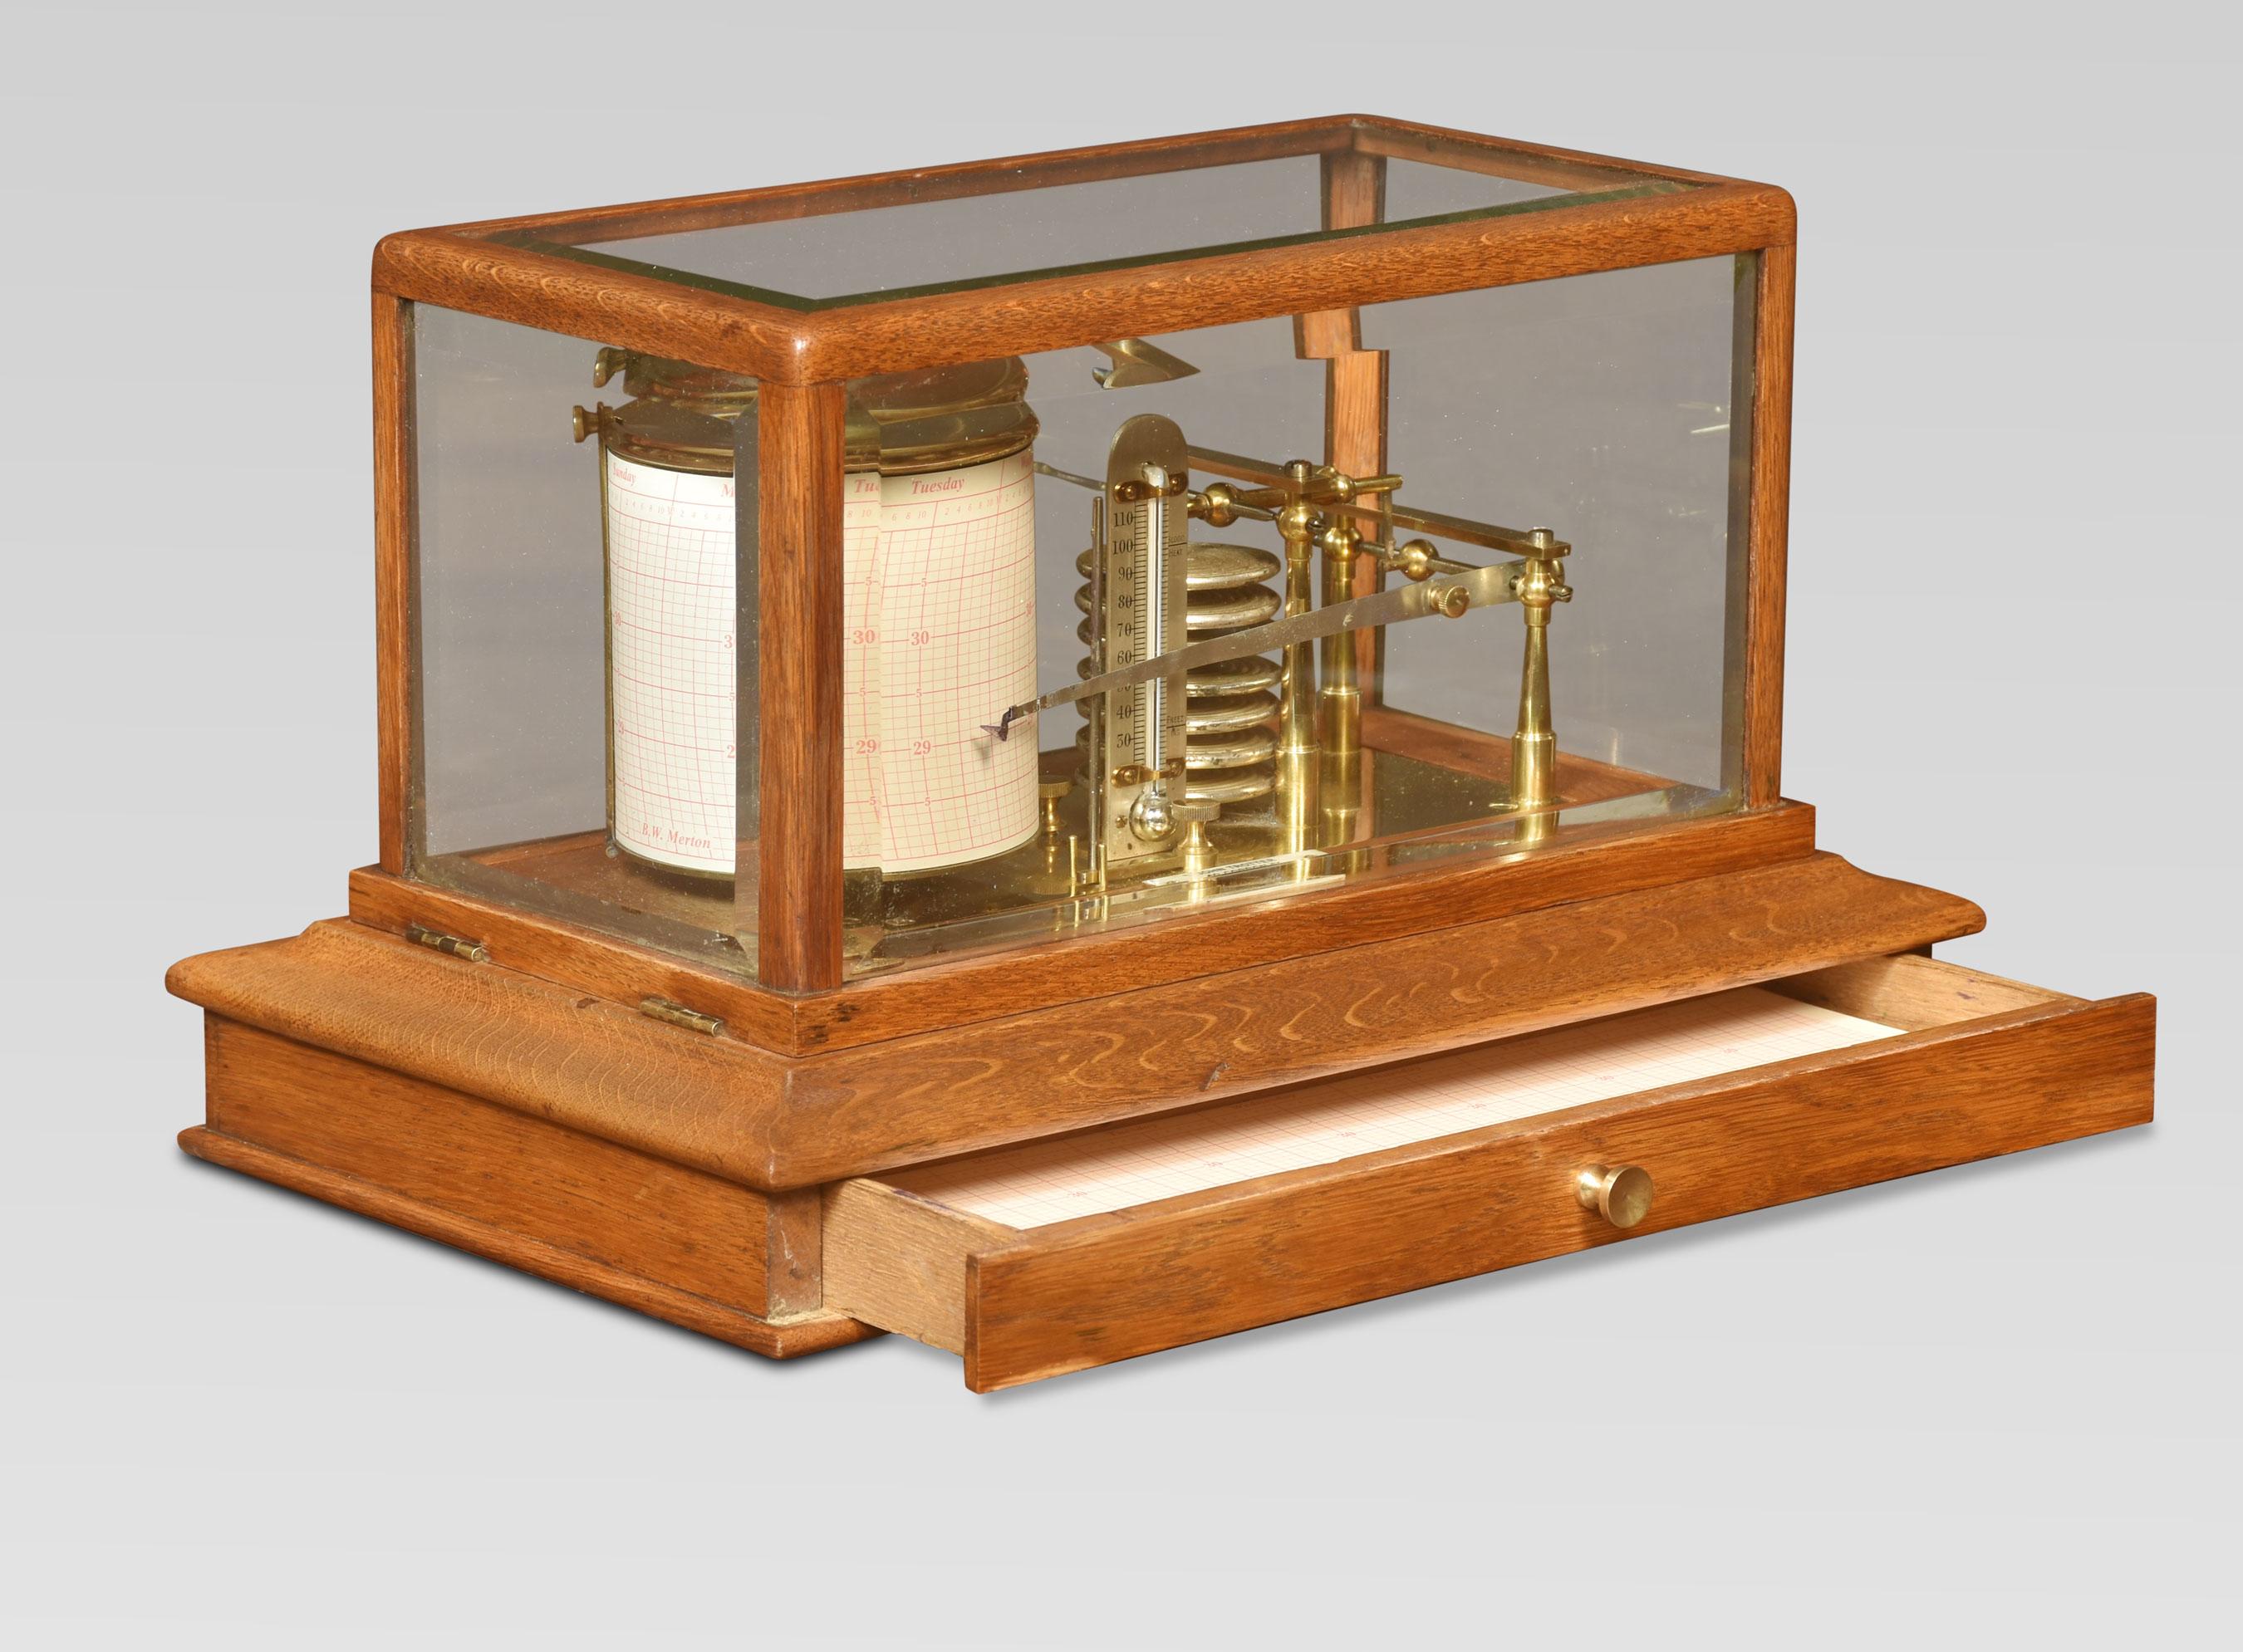 oak cased barograph and thermometer by John Trotter of Glasgow, having a hinged five-beveled glazed removable lid. The mechanical eight-day movement is housed in the drum, fitted with a seven-day chart that covers one full rotation of the drum. The